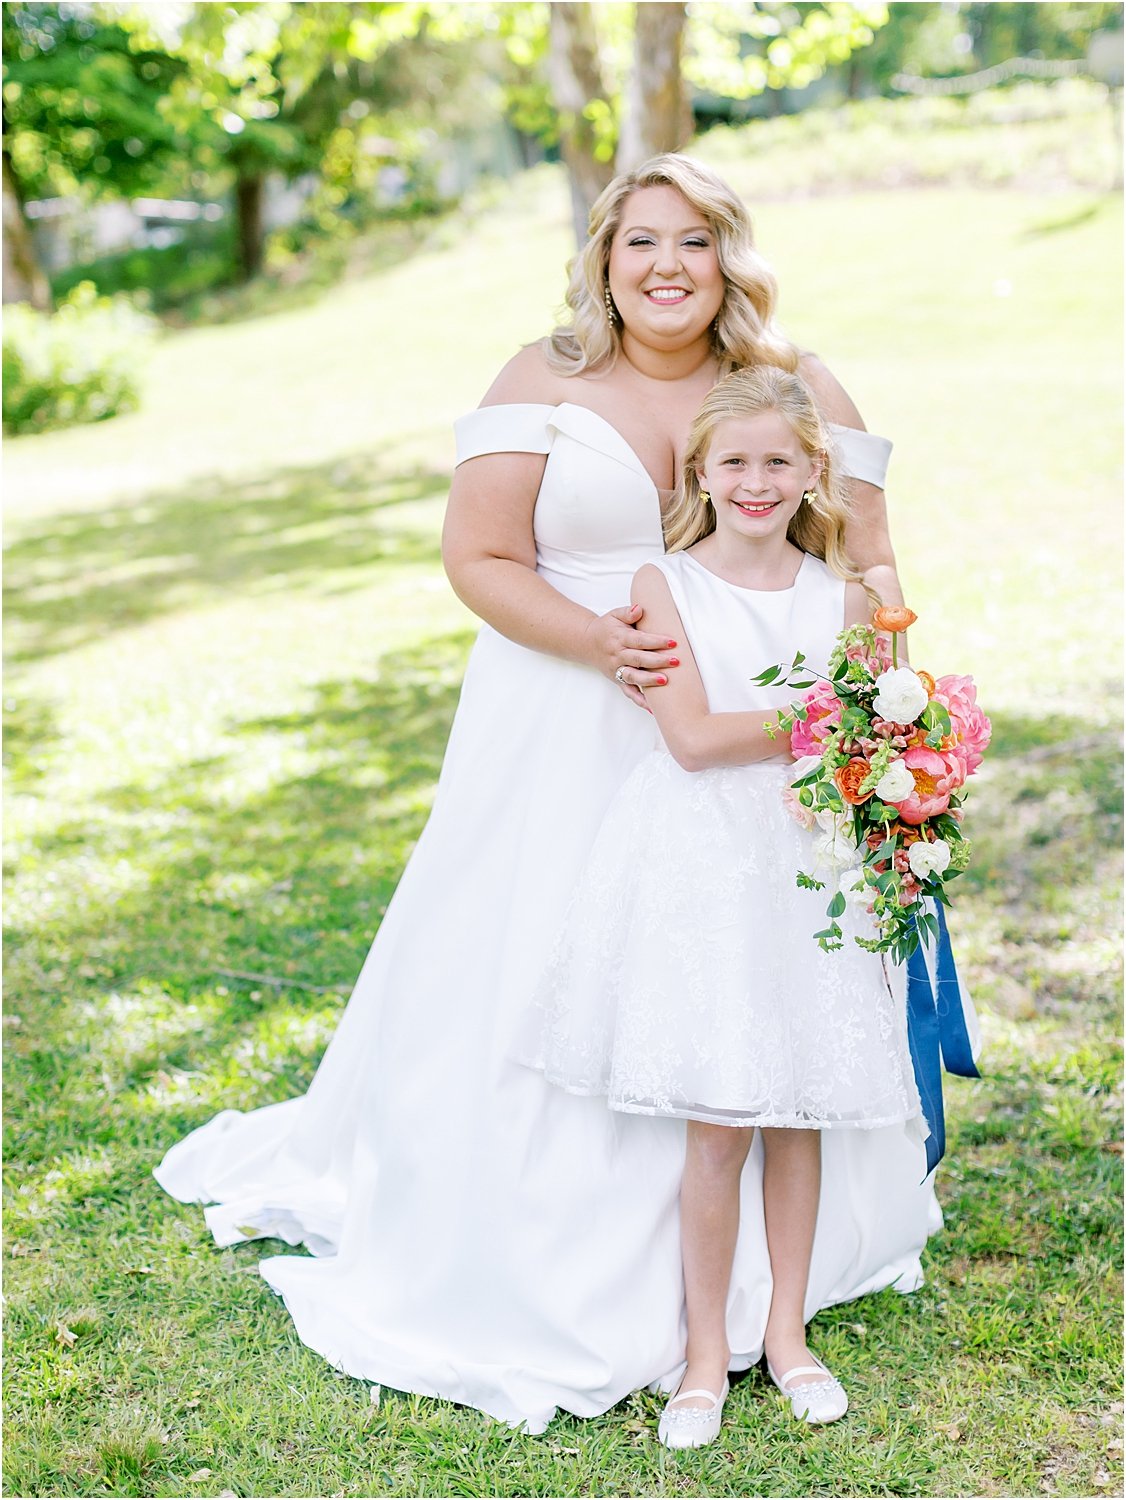 Bride and flower girl photo inspiration 